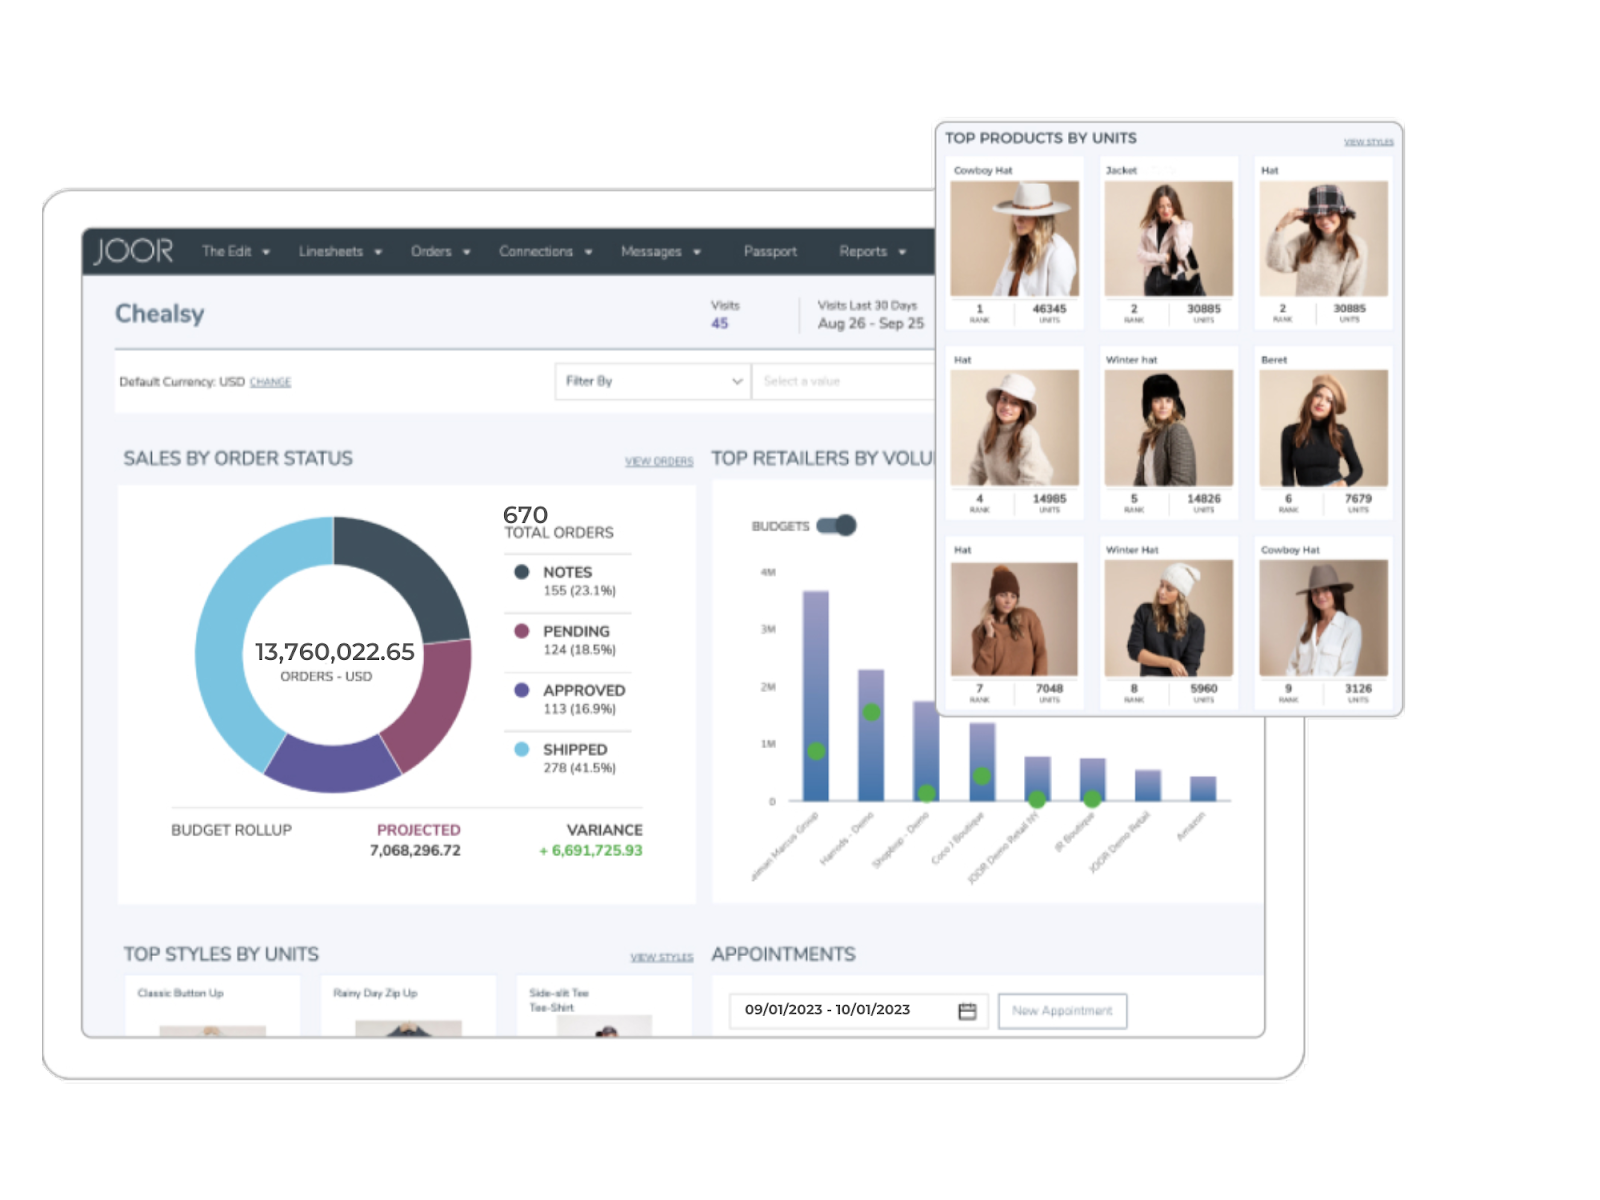 JOOR helps brands and retailers make informed business decisions with access to real-time data. Users can surface valuable insights and buying trends to optimize sales across products, seasons, and geographies.